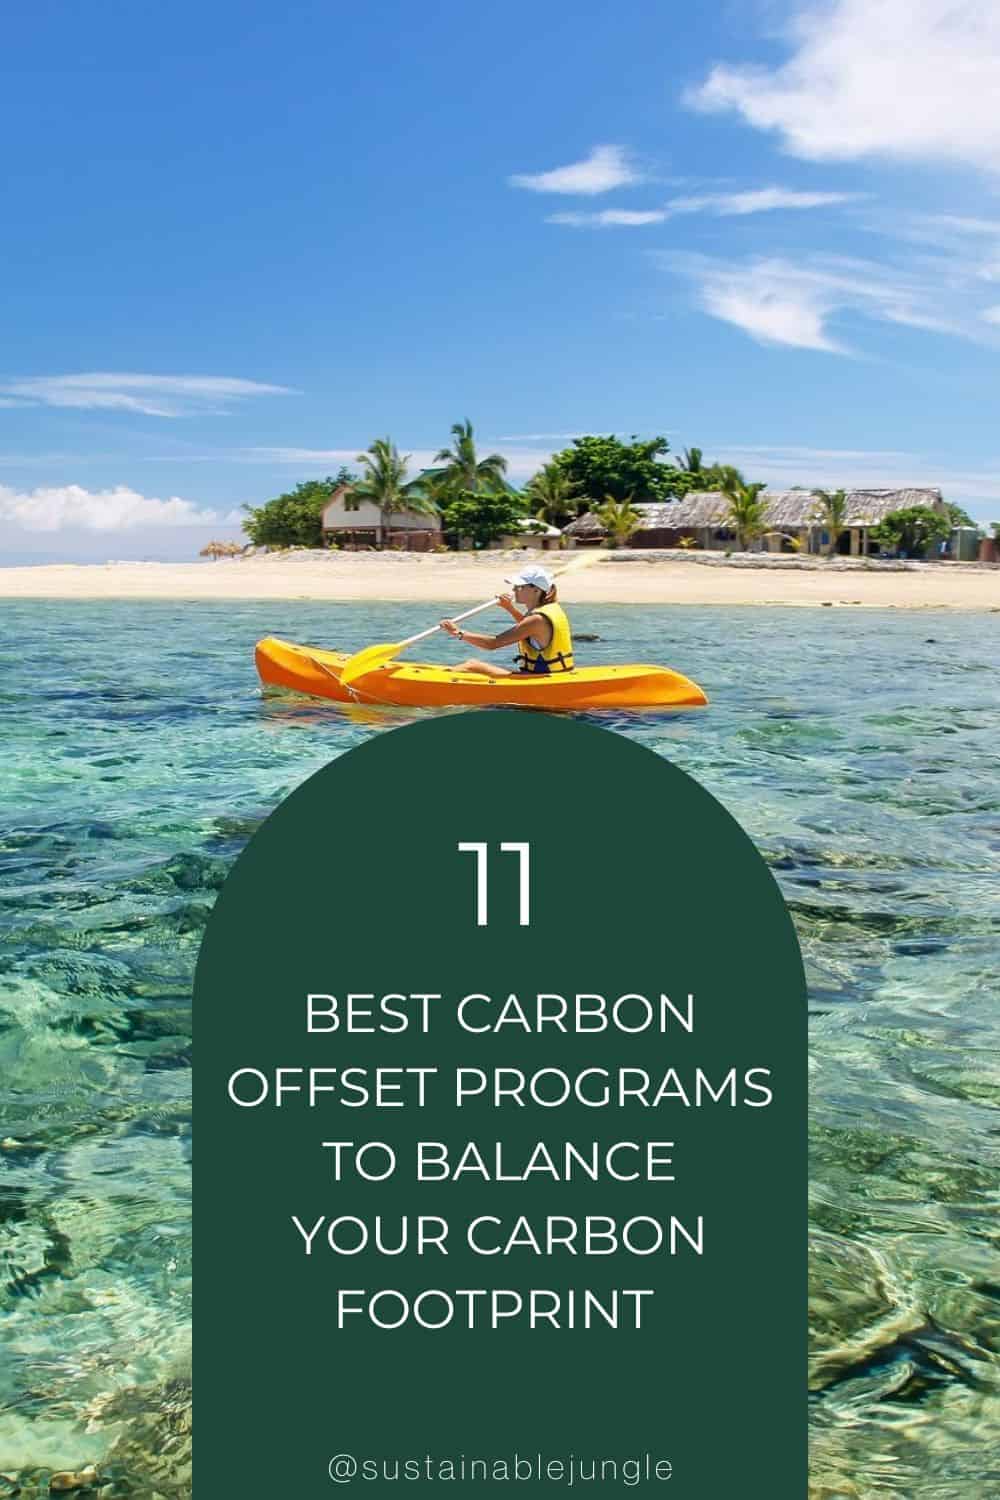 9 Best Carbon Offset Programs To Balance Your Carbon Footprint Image by Sustainable Travel International #bestcarbonoffsetprograms #carbonoffsetproviders #carbonoffsetcompanies #wheretobuycarbonoffsets #bestcarbonoffsetproviders #sustainablejungle